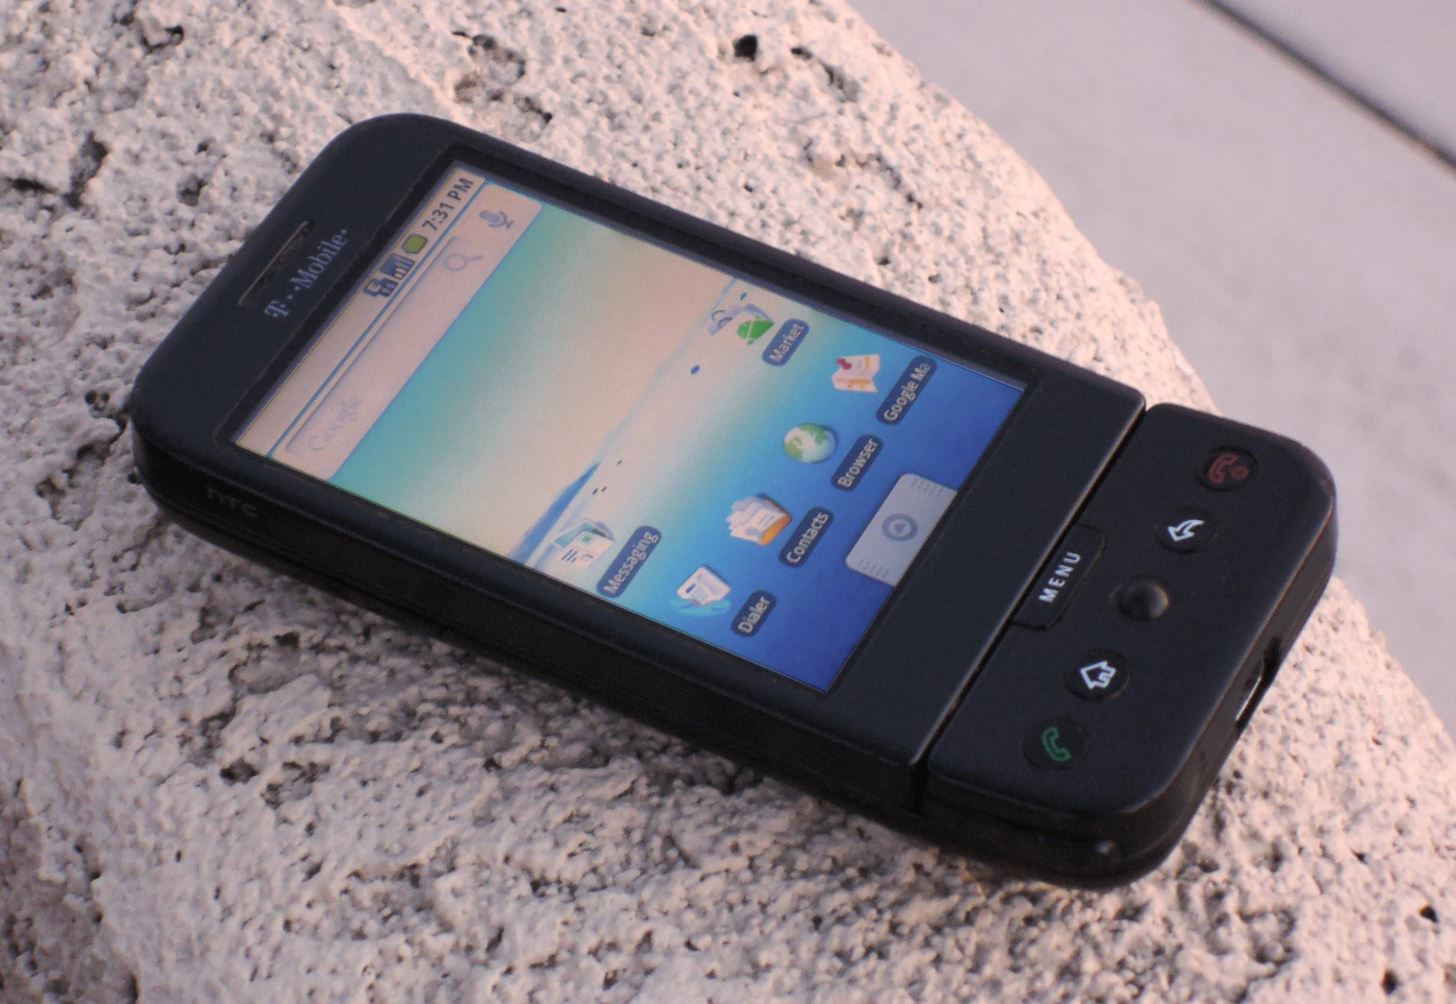 Hands-on with the World's First Android Phone — What a Difference a Decade Makes